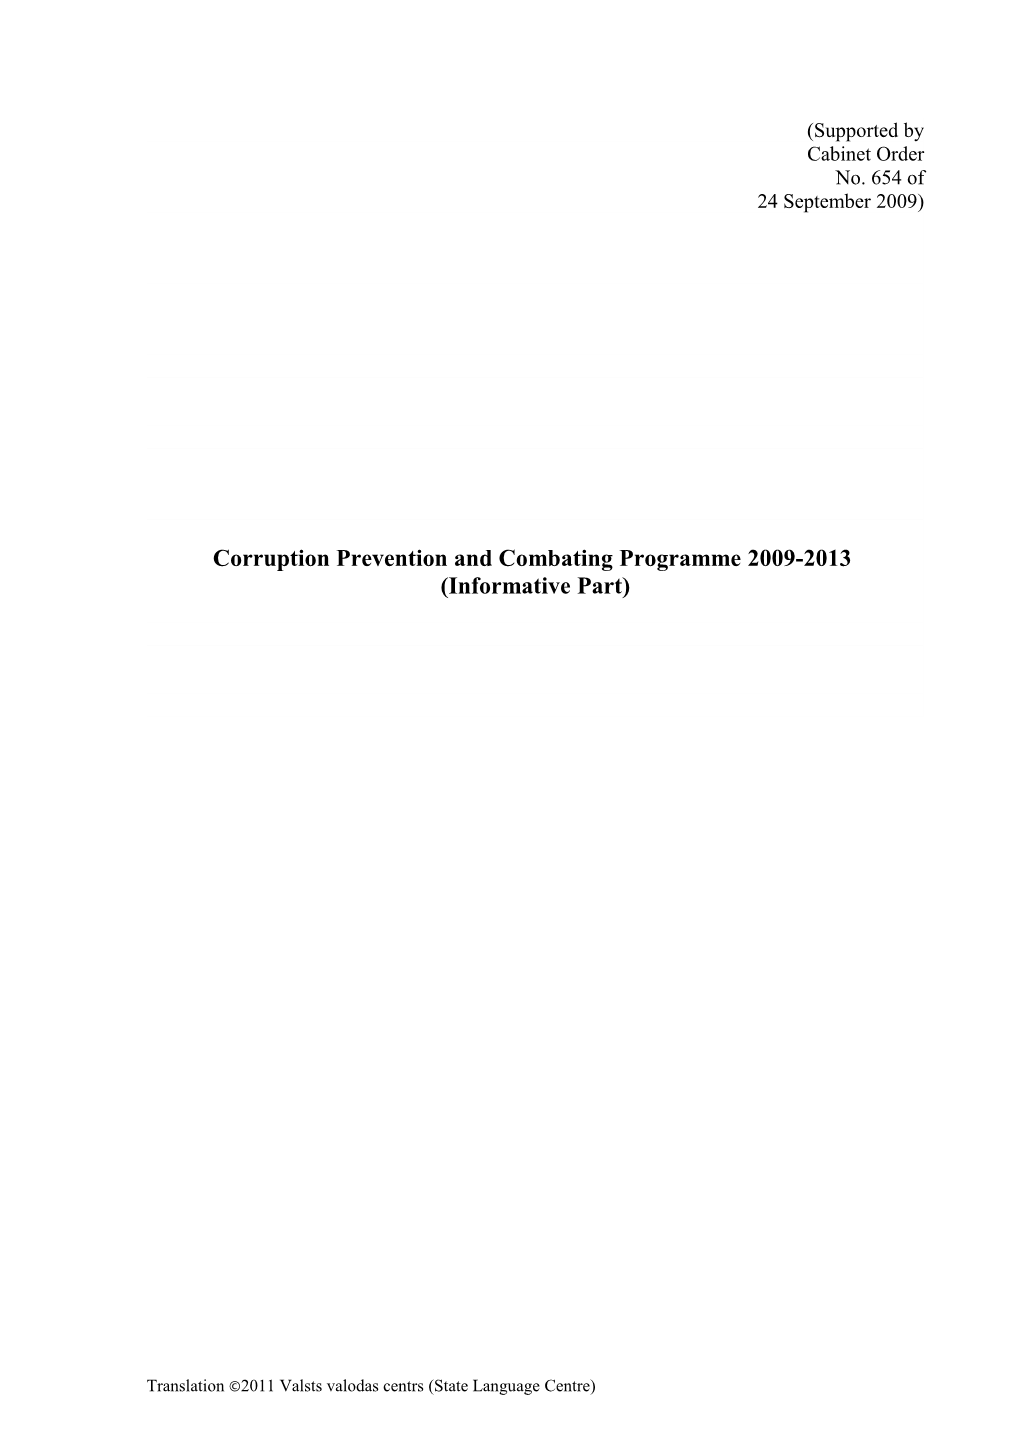 Corruption Prevention and Combating Programme 2009-2013